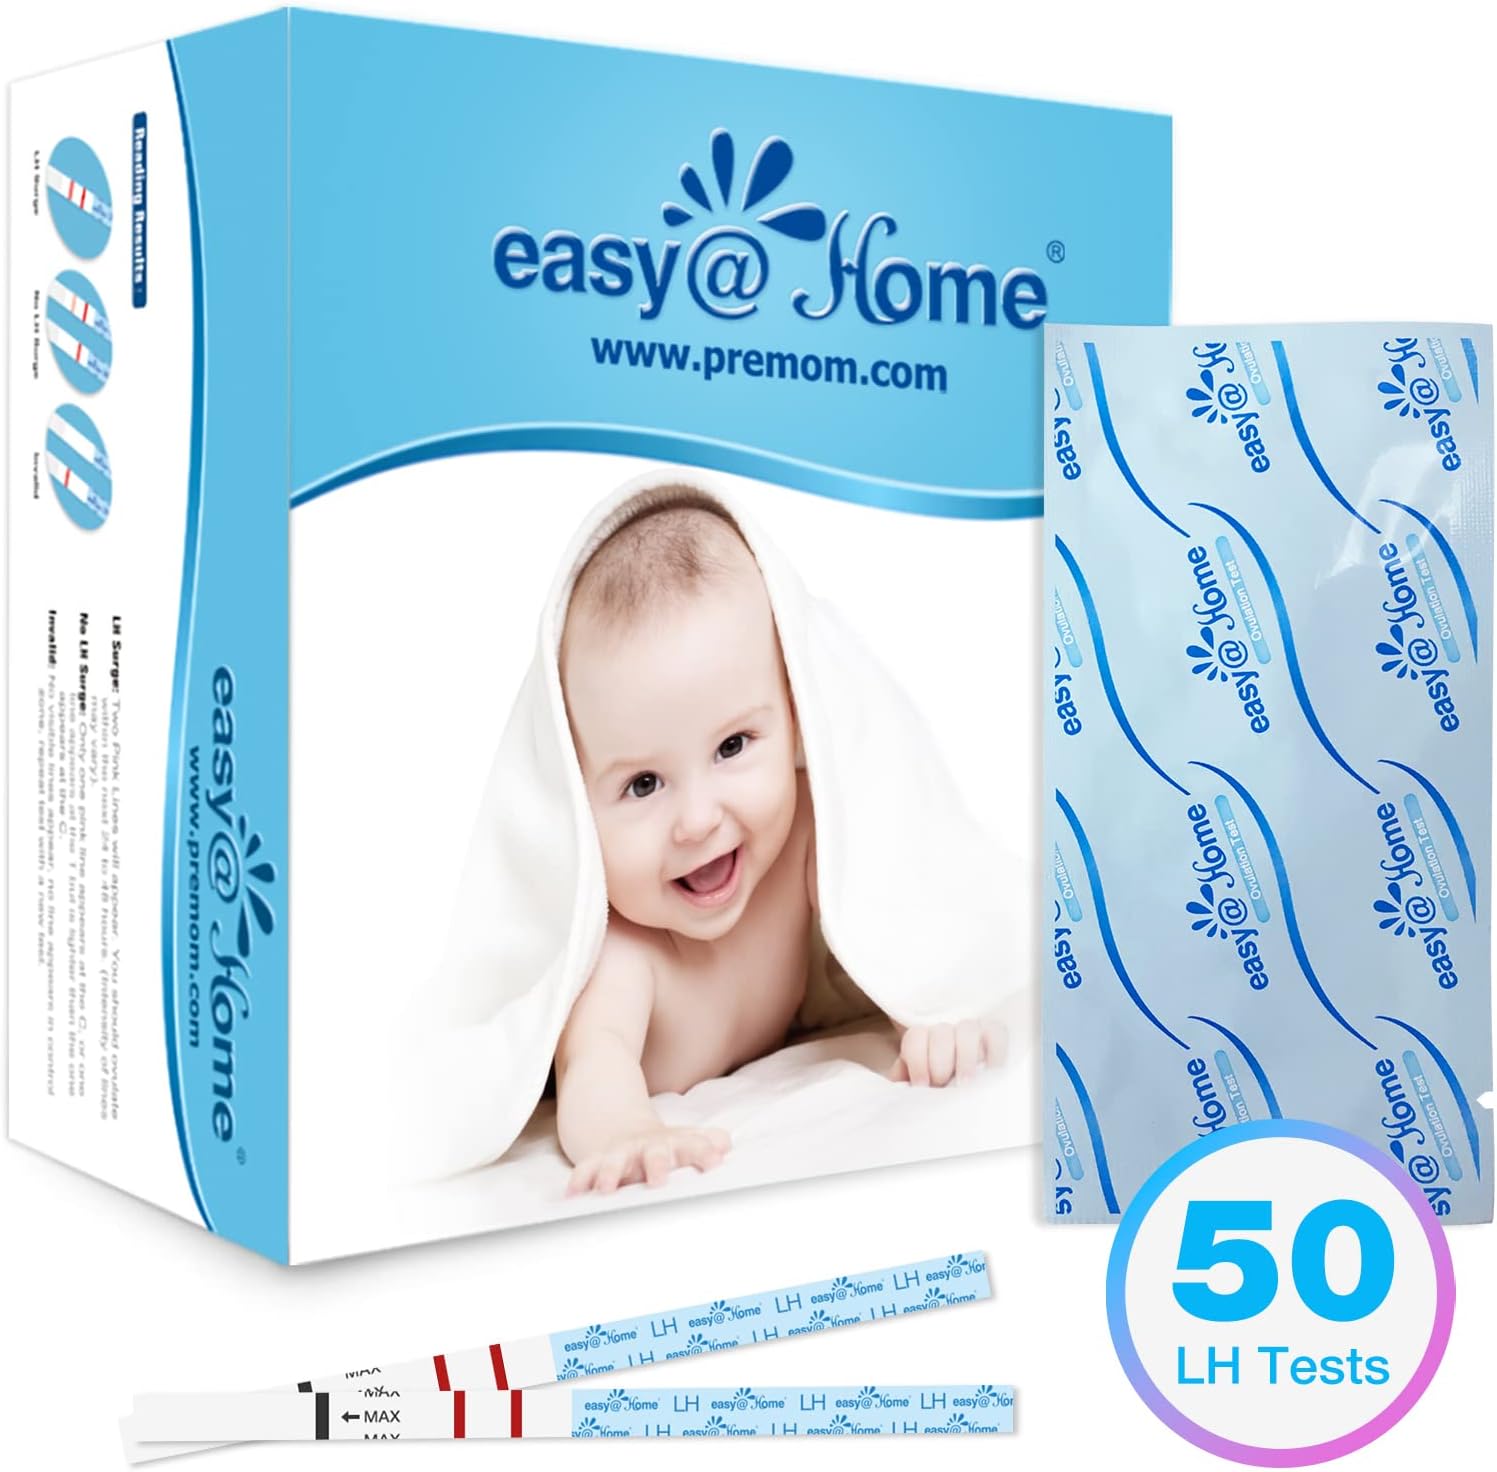 Easy@Home Ovulation Test Strips (50-Pack), FSA Eligible Ovulation Predictor Kit, Powered by Premom Ovulation Calculator iOS and Android APP, 50 LH Tests : Health & Household